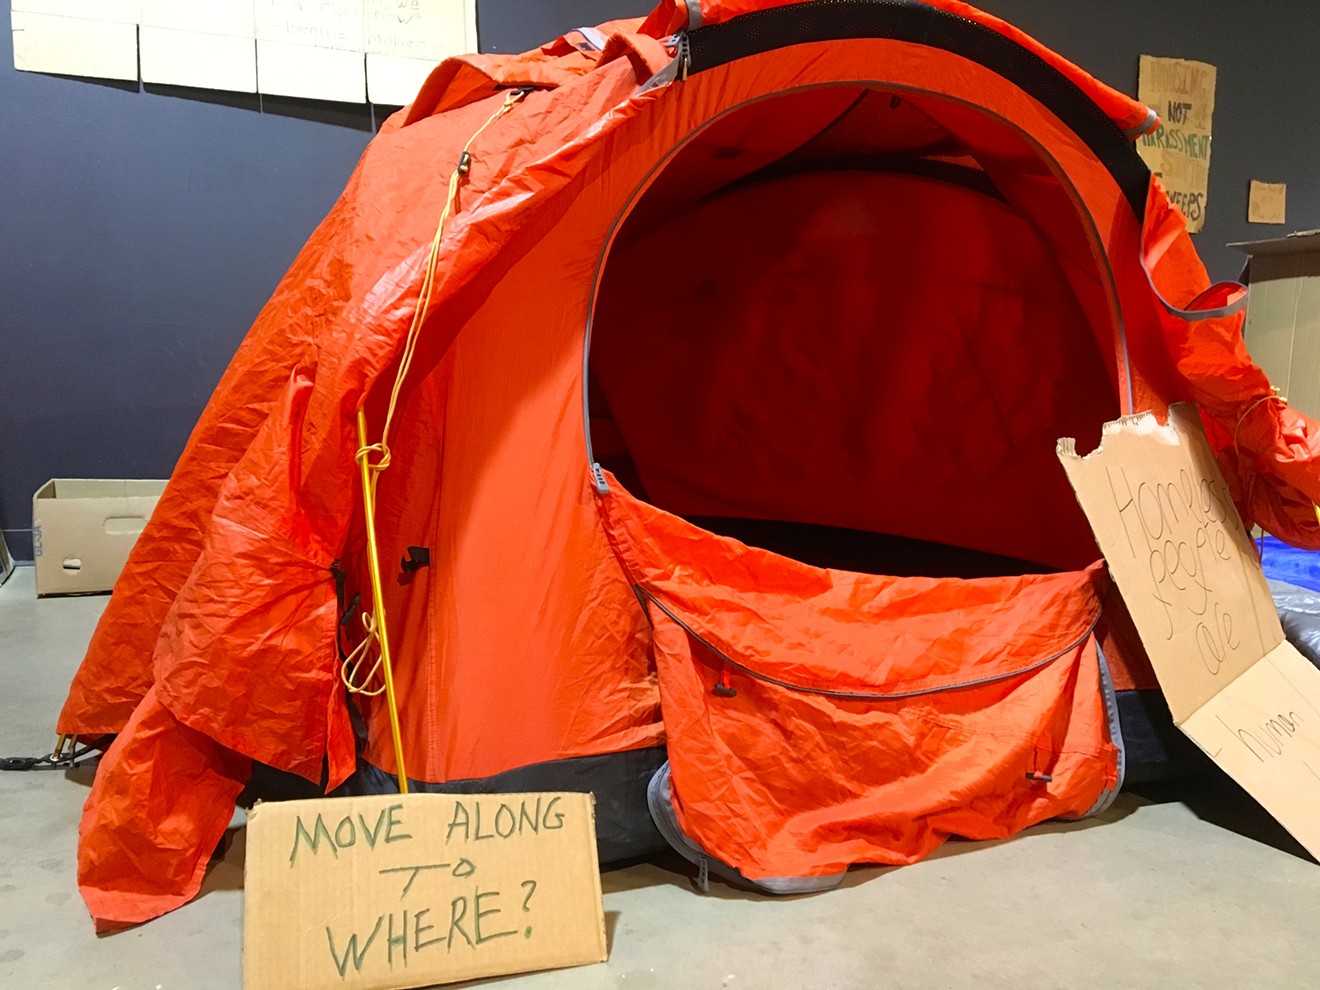 Friday's event at RedLine included an exhibit of signs and tents used by those experiencing homelessness.